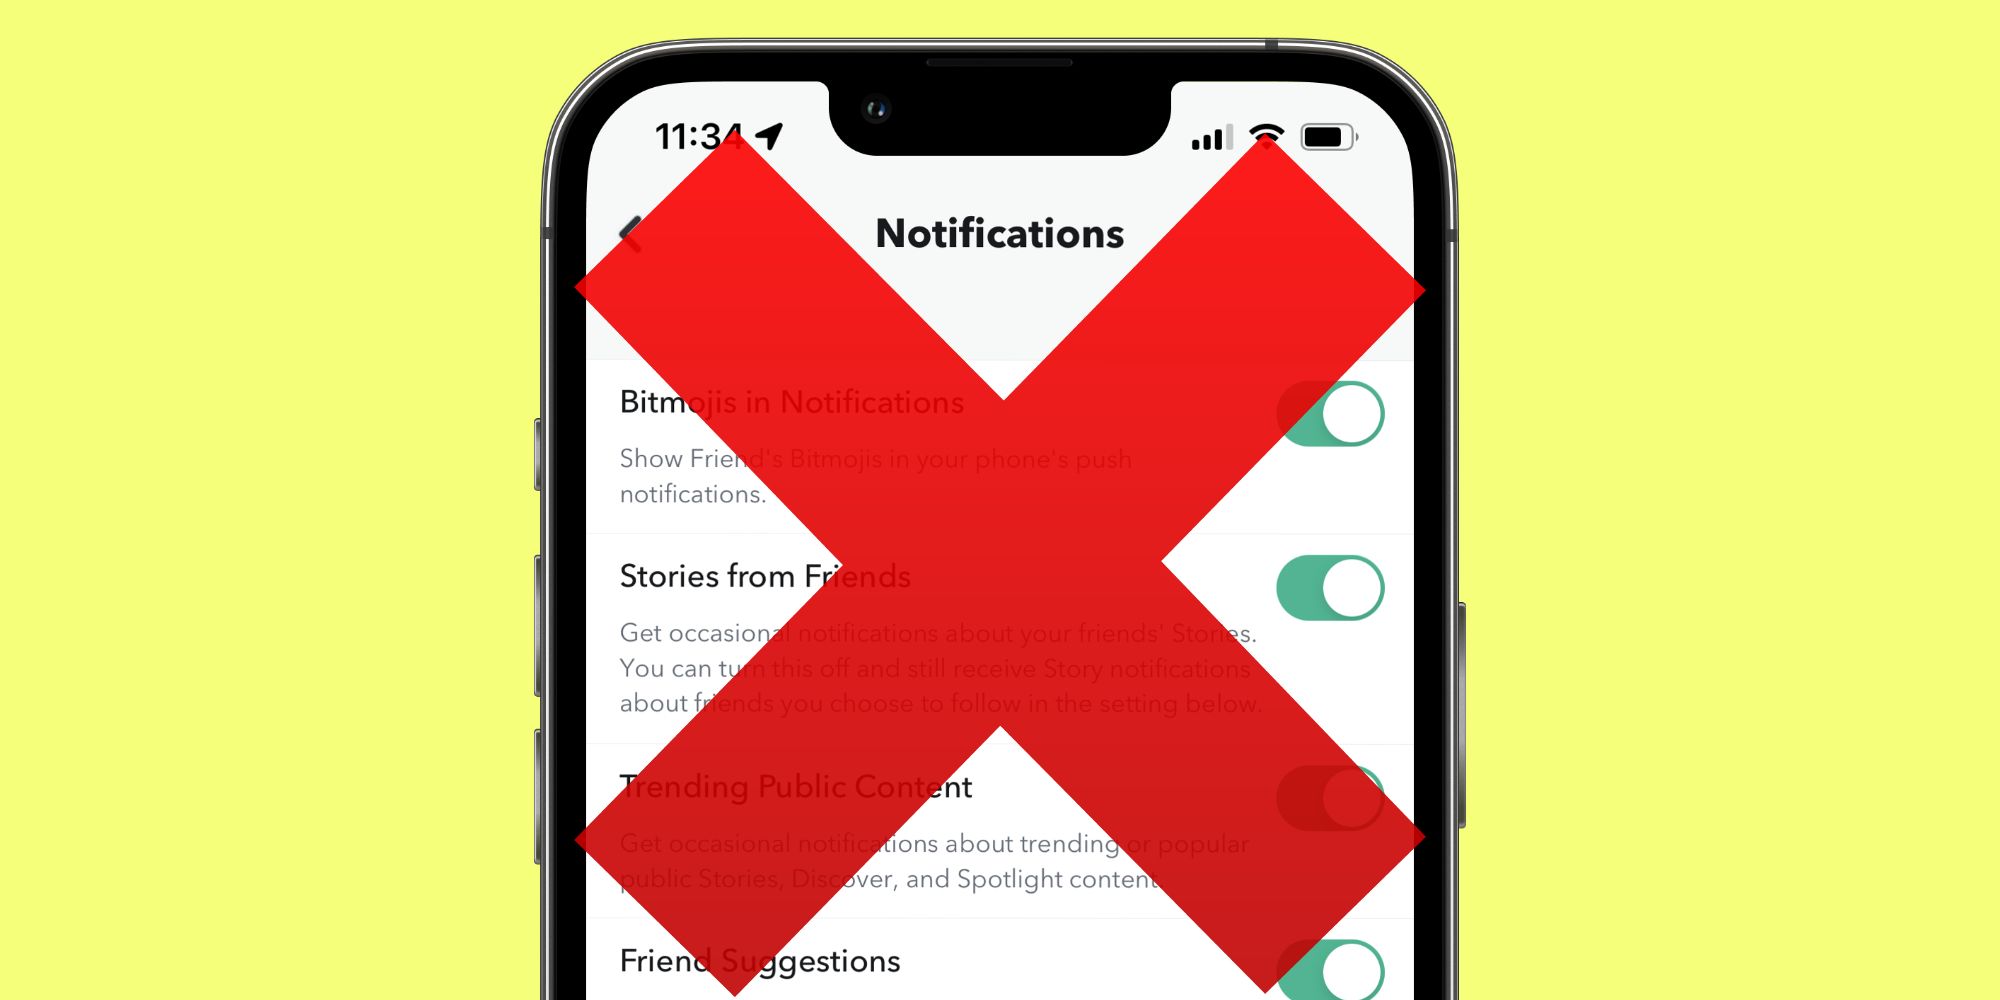 Snapchat's notifications settings on iPhone covered by red X